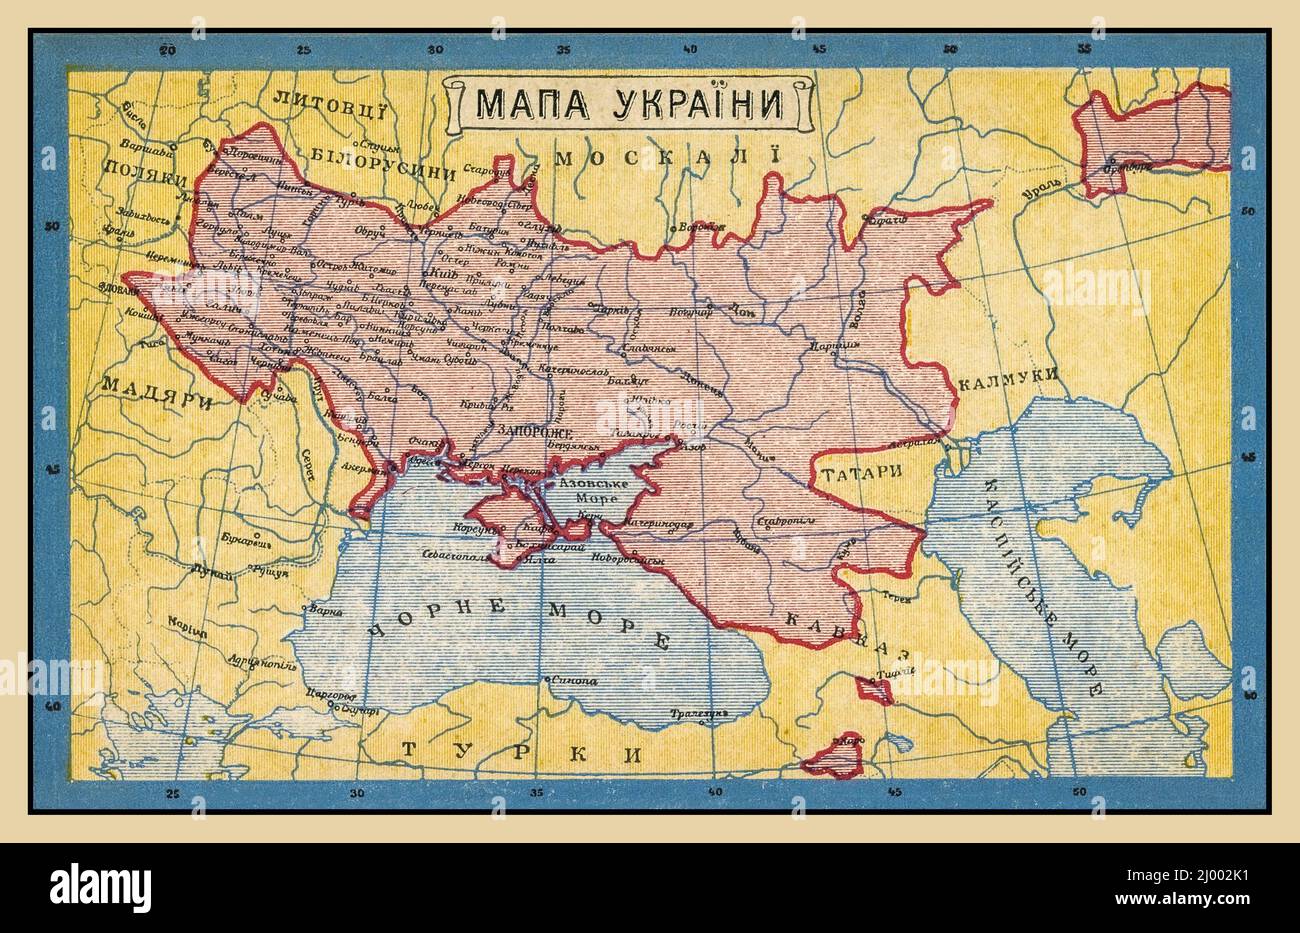 UKRAINE Vintage 1900s Map of Ukraine Old Ukraine historic poster postcard (1919) Text in Ukranian/Russian Country boundary borders in red Stock Photo